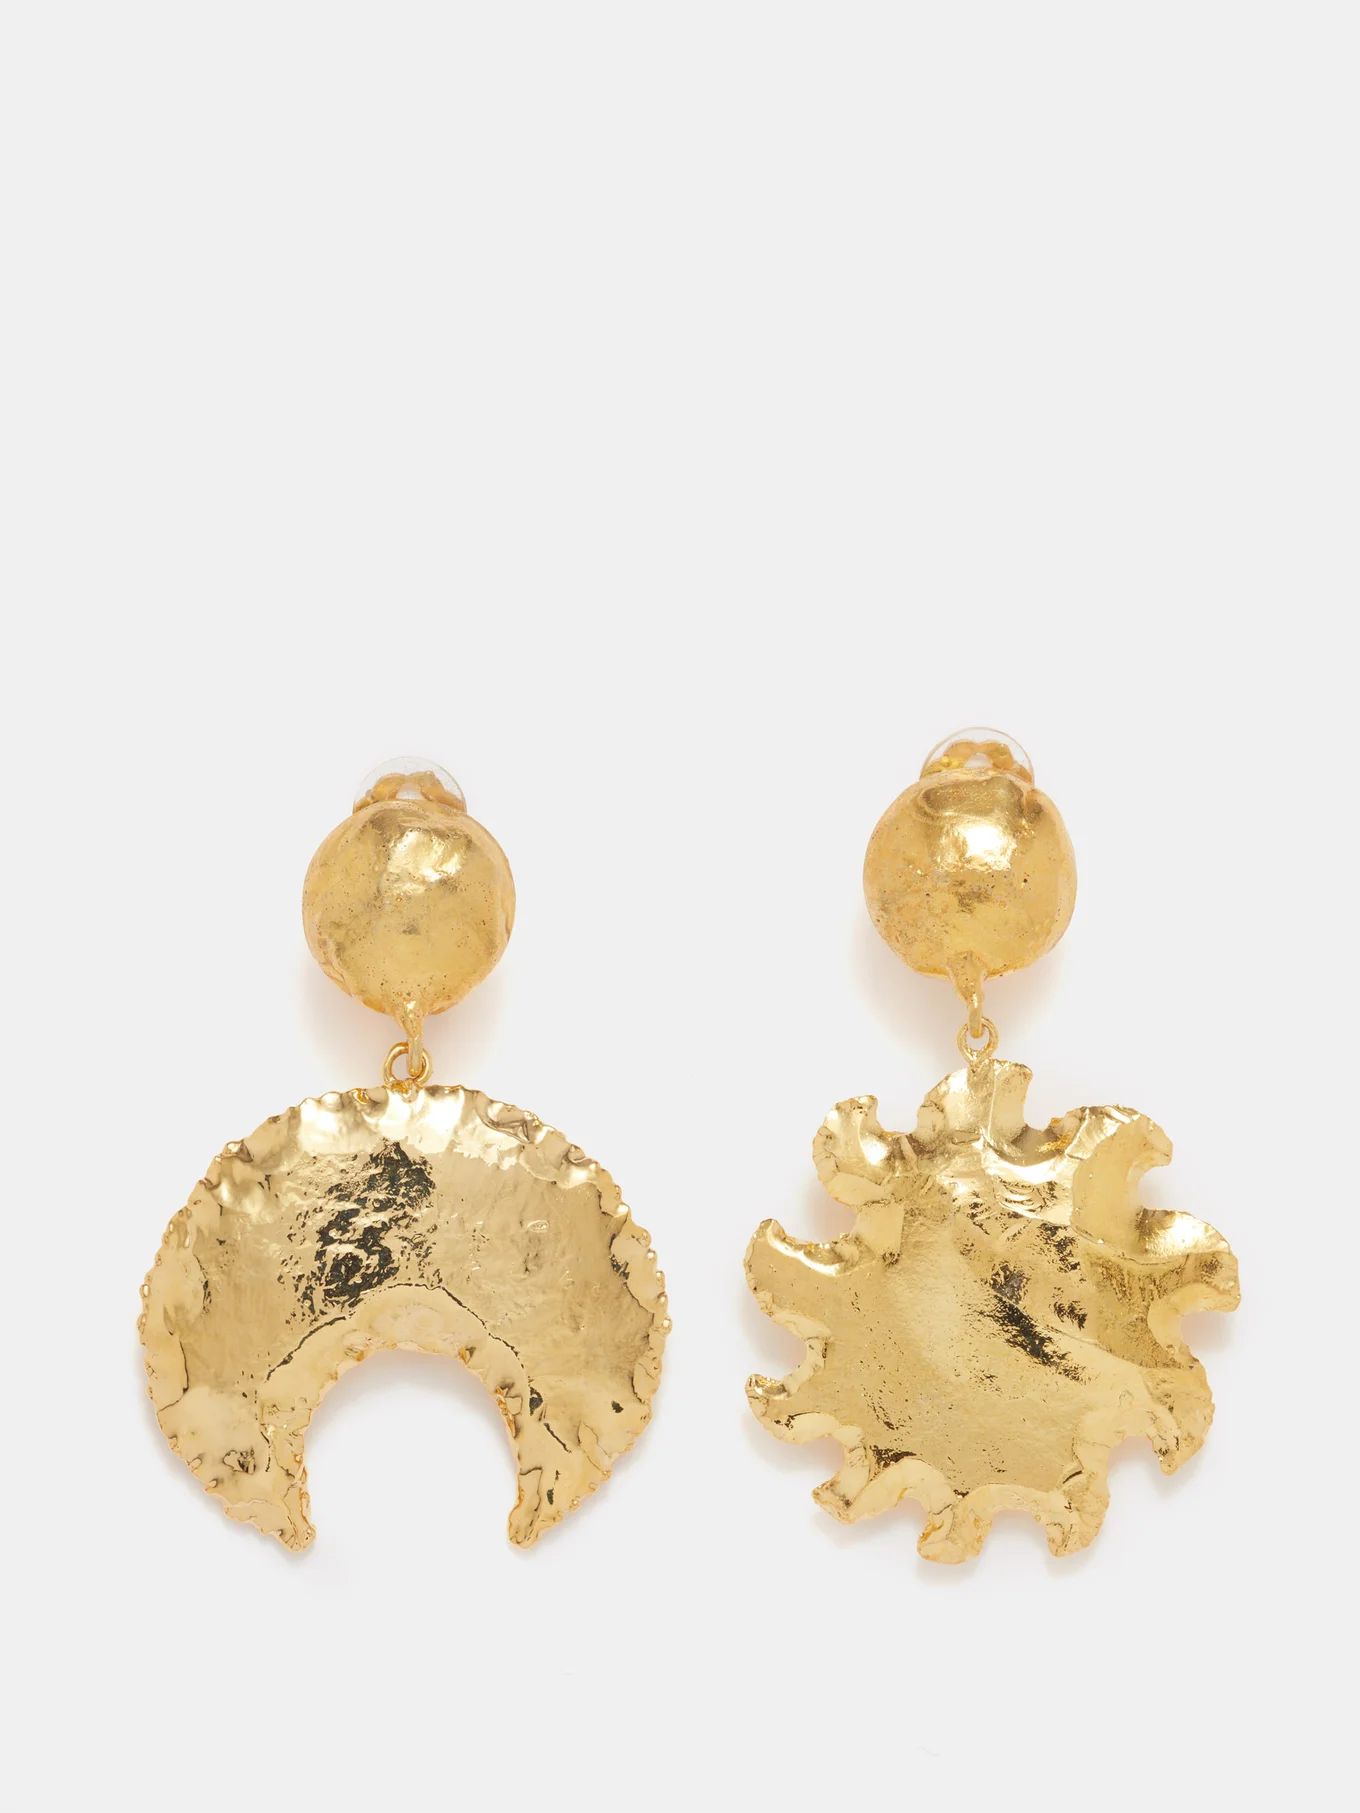 Sol y Luna gold-plated clip earrings | Sylvia Toledano | Matches (international)